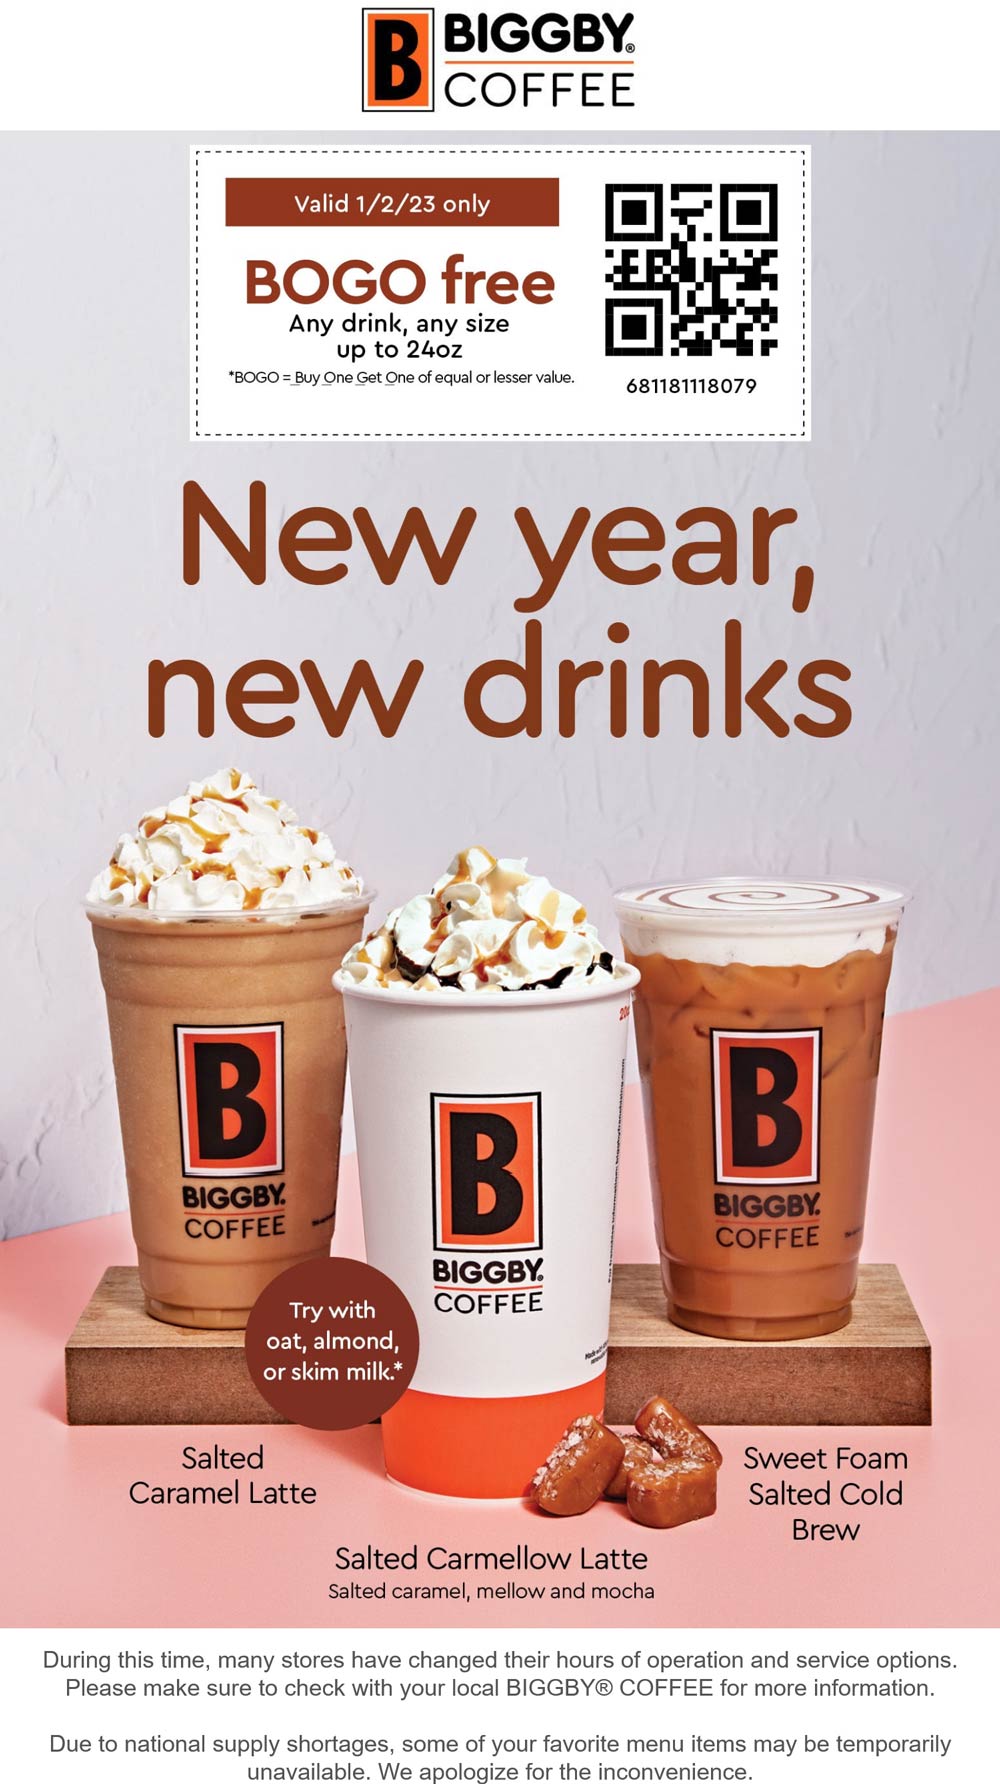 Biggby Coffee coupons & promo code for [February 2023]